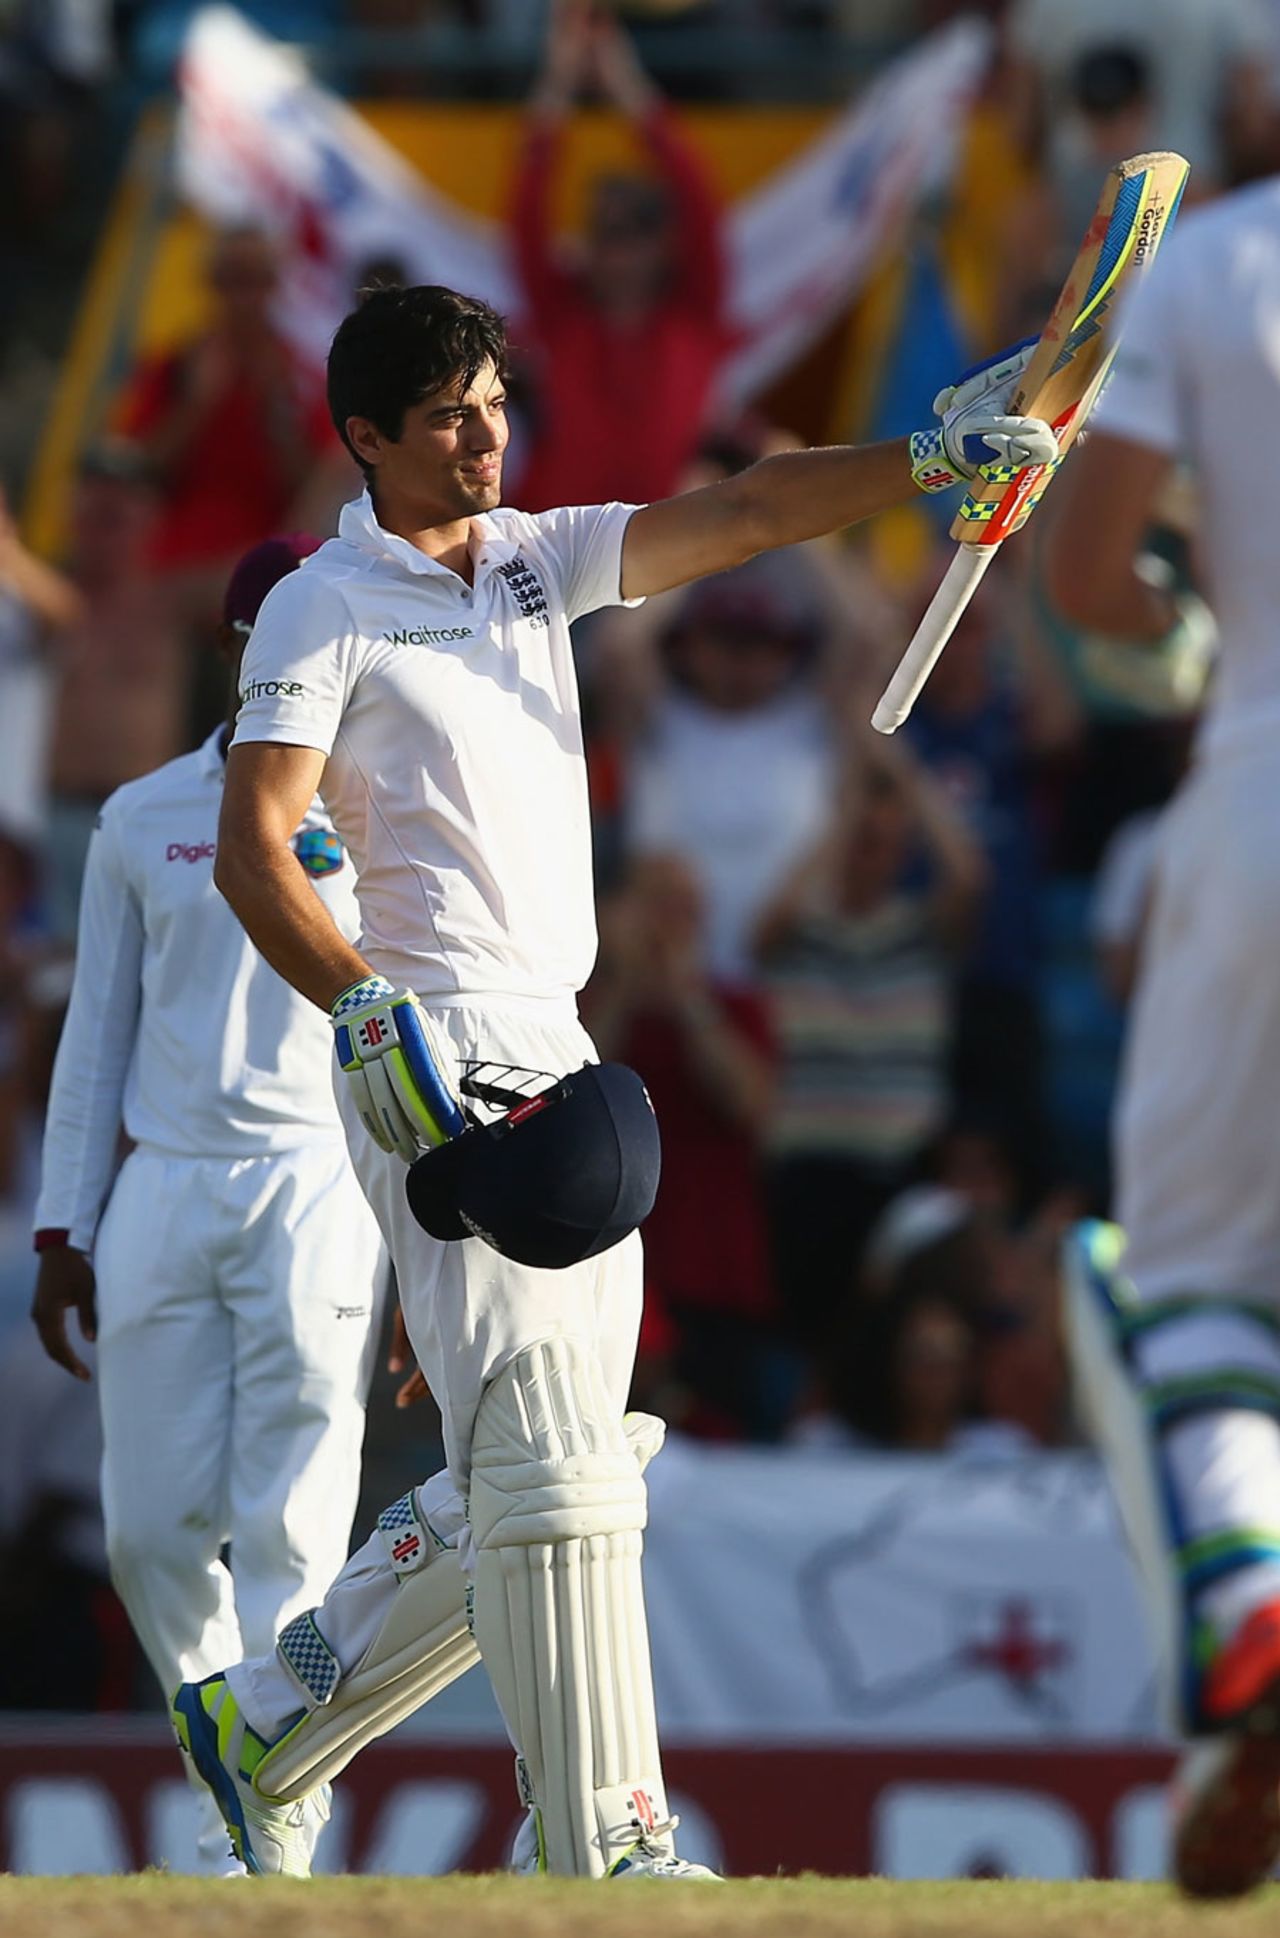 Alastair Cook celebrates his 26th Test hundred, West Indies v England, 3rd Test, Bridgetown, 1st day, May 1, 2015